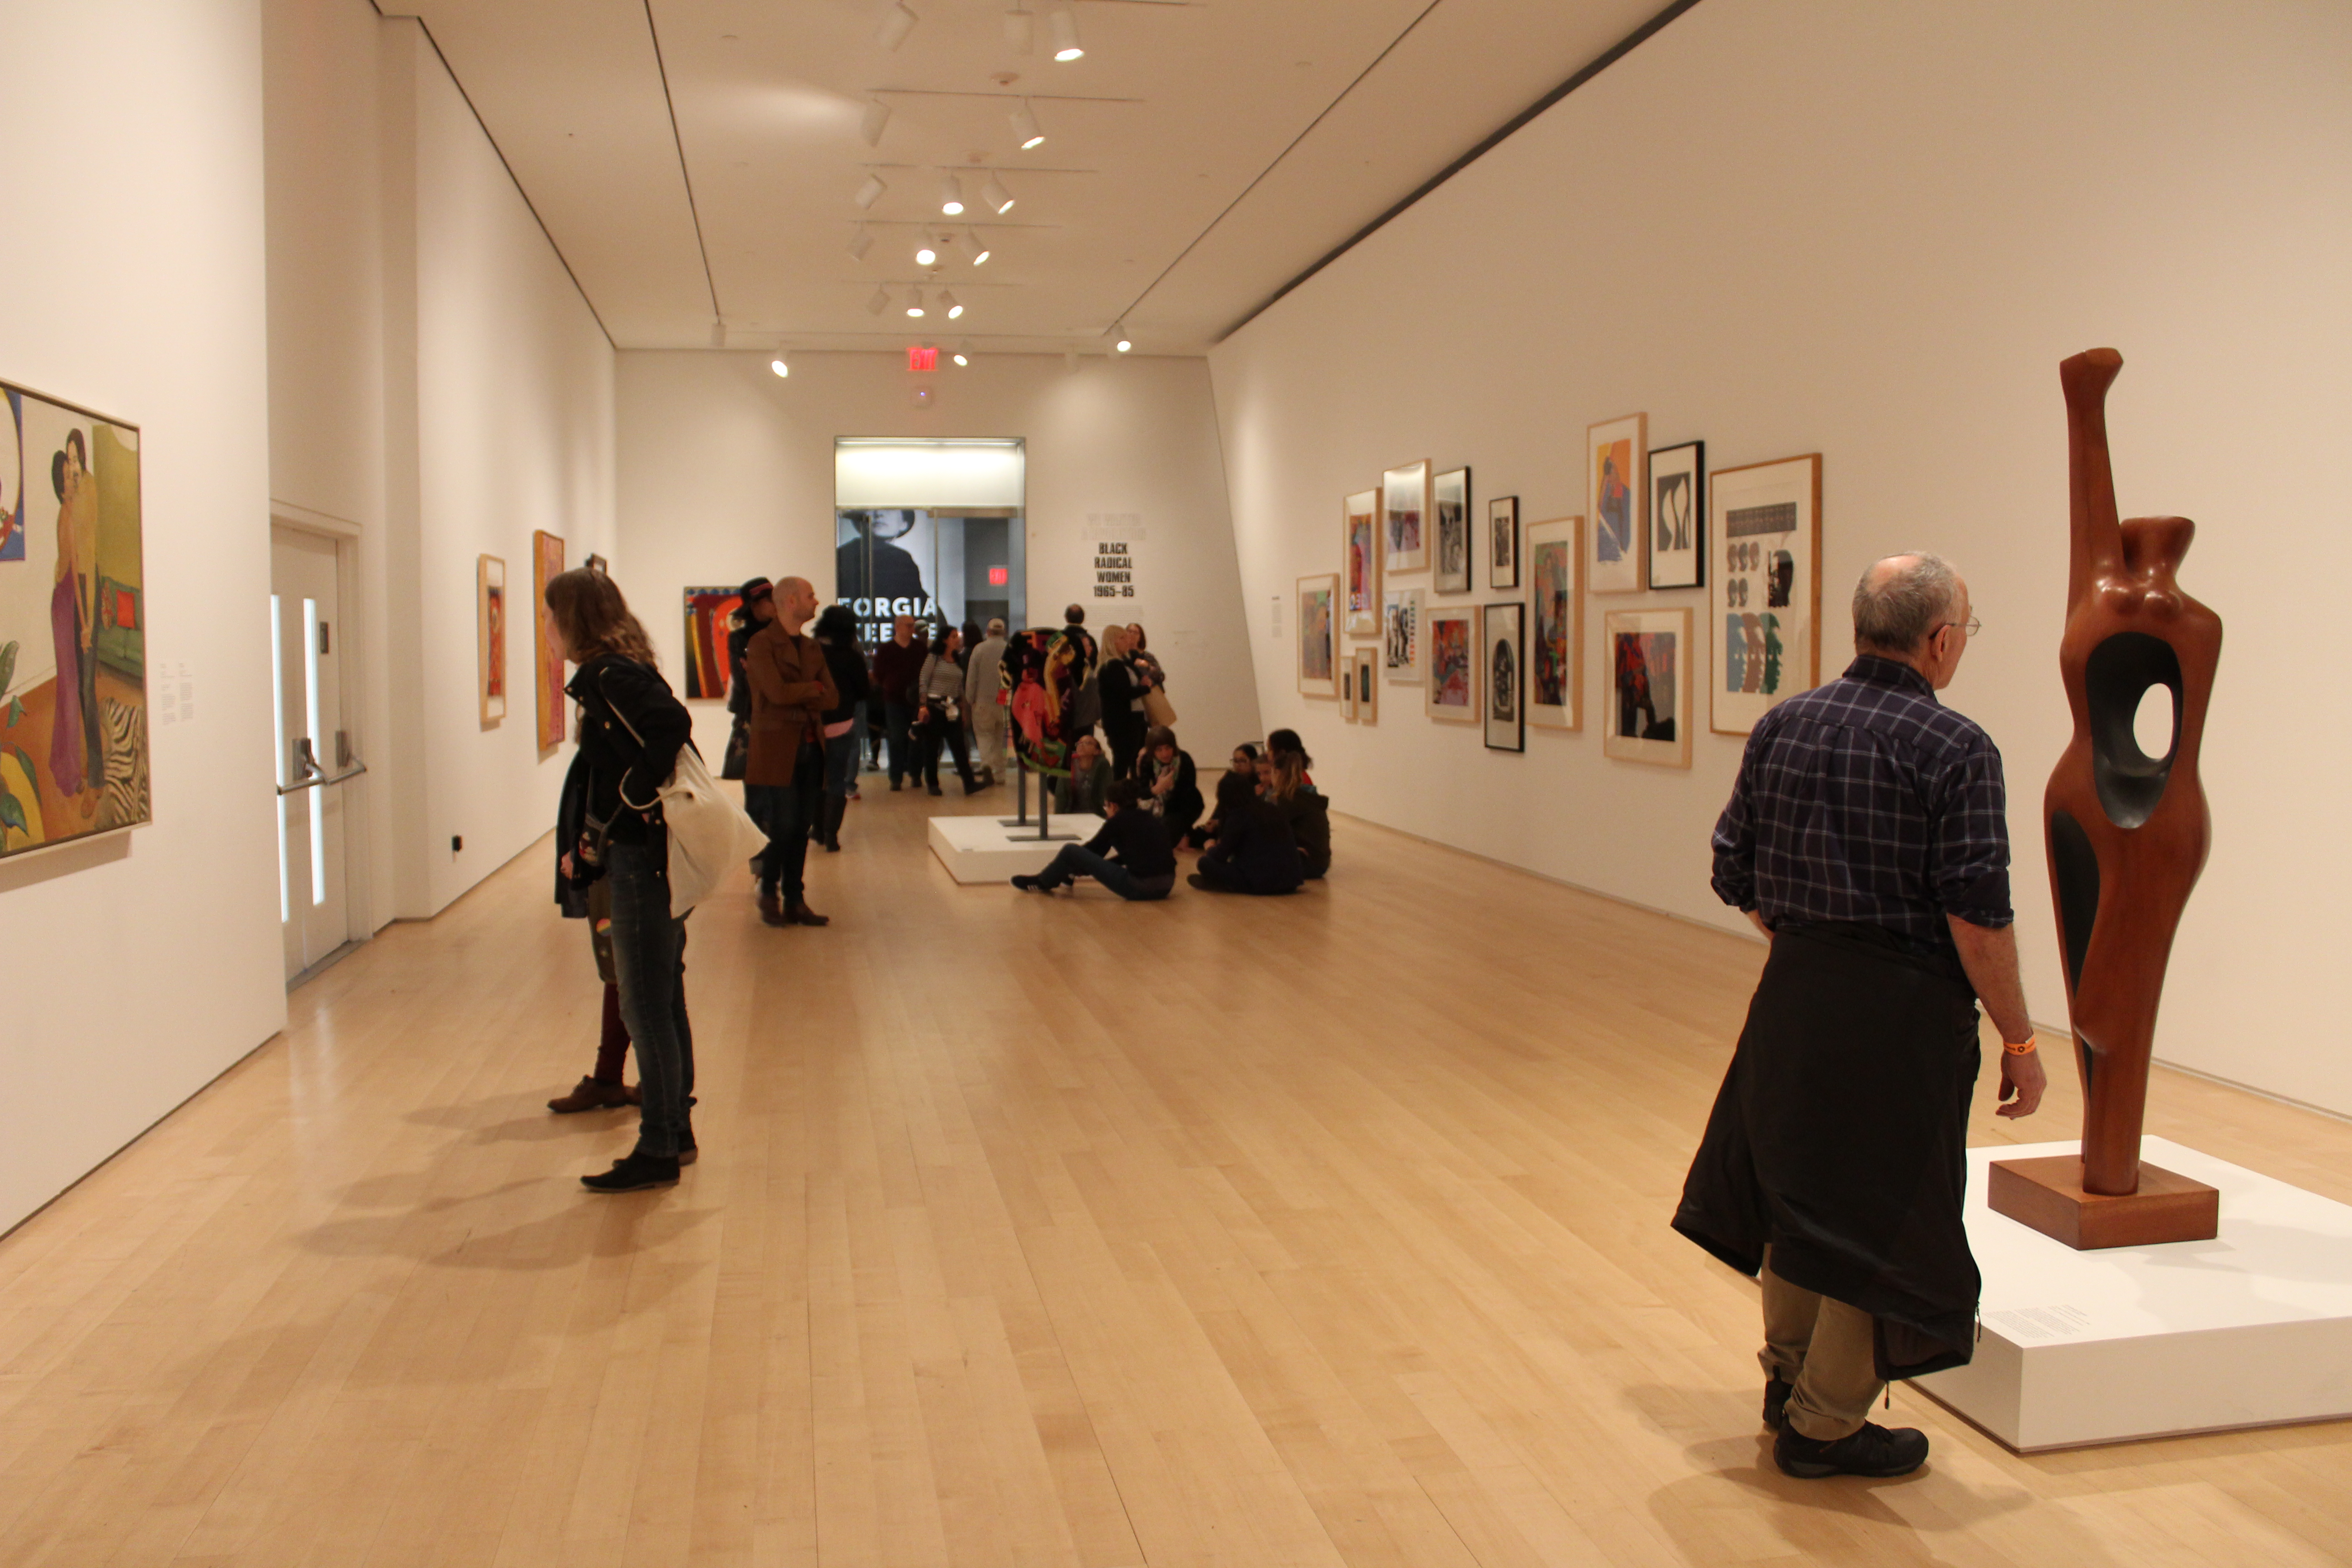 A peek into the first gallery space of the exhibition. Photocredit: Chanel Thervil